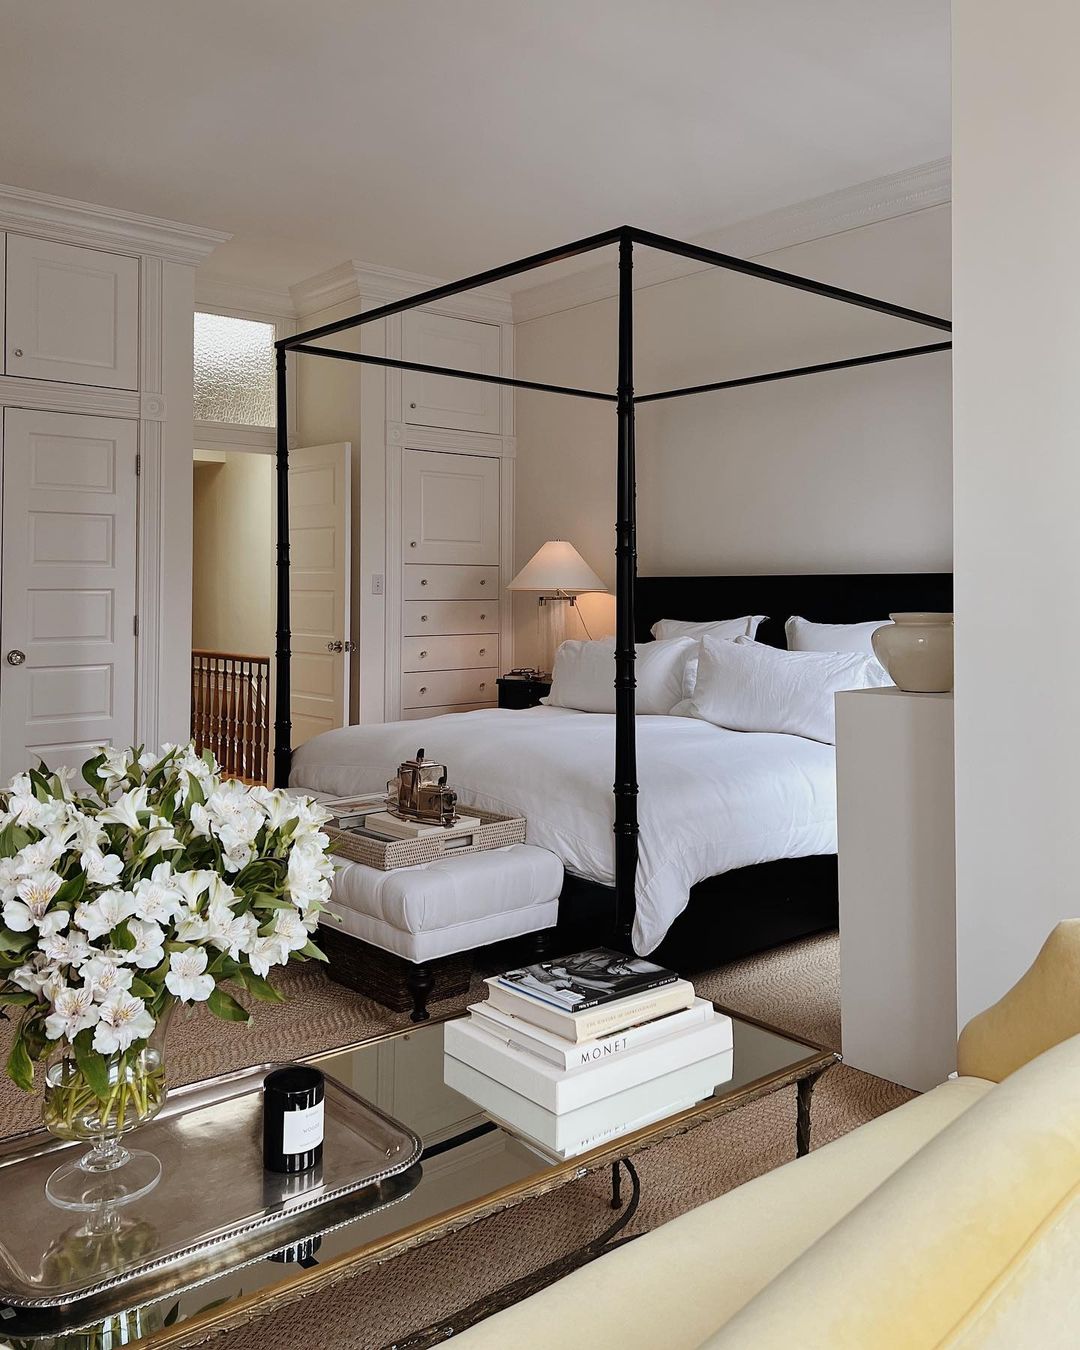 Luxurious Four Poster Bed with Elegant White Bedding